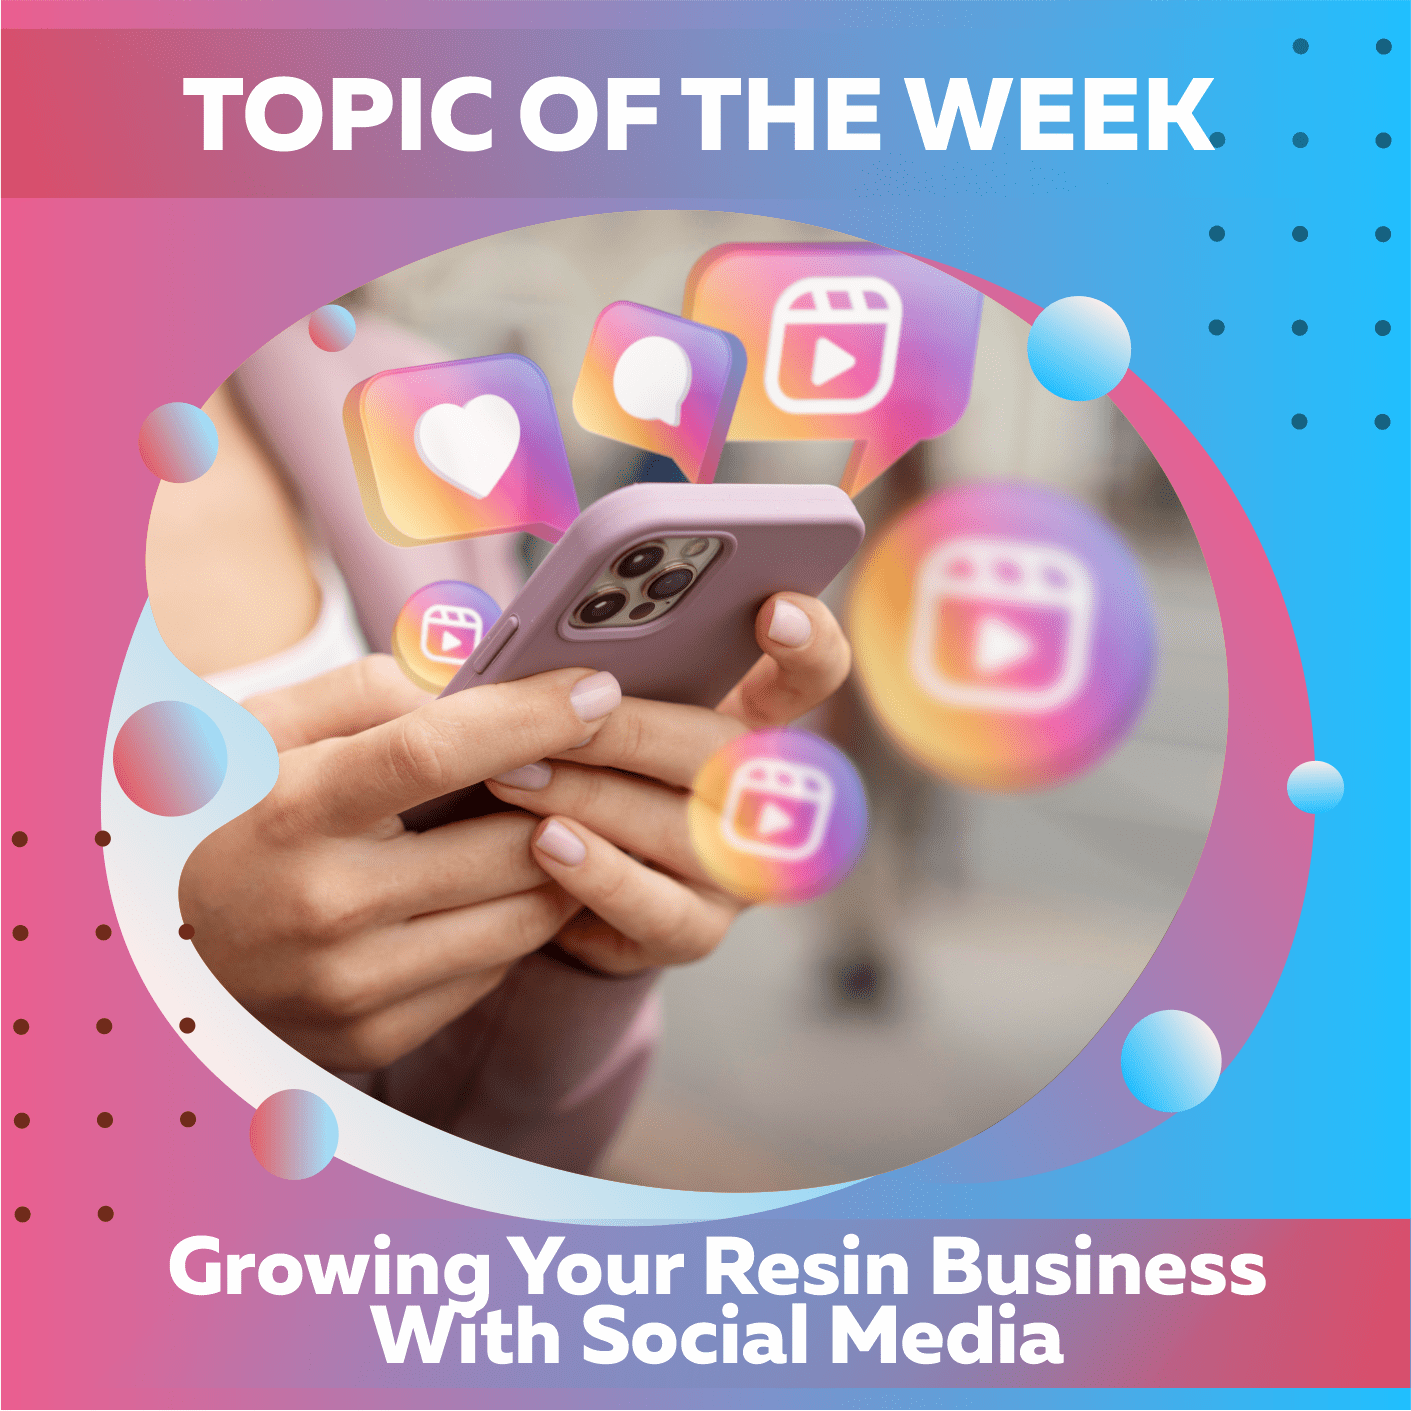 Growing Your Resin Business With Social Media